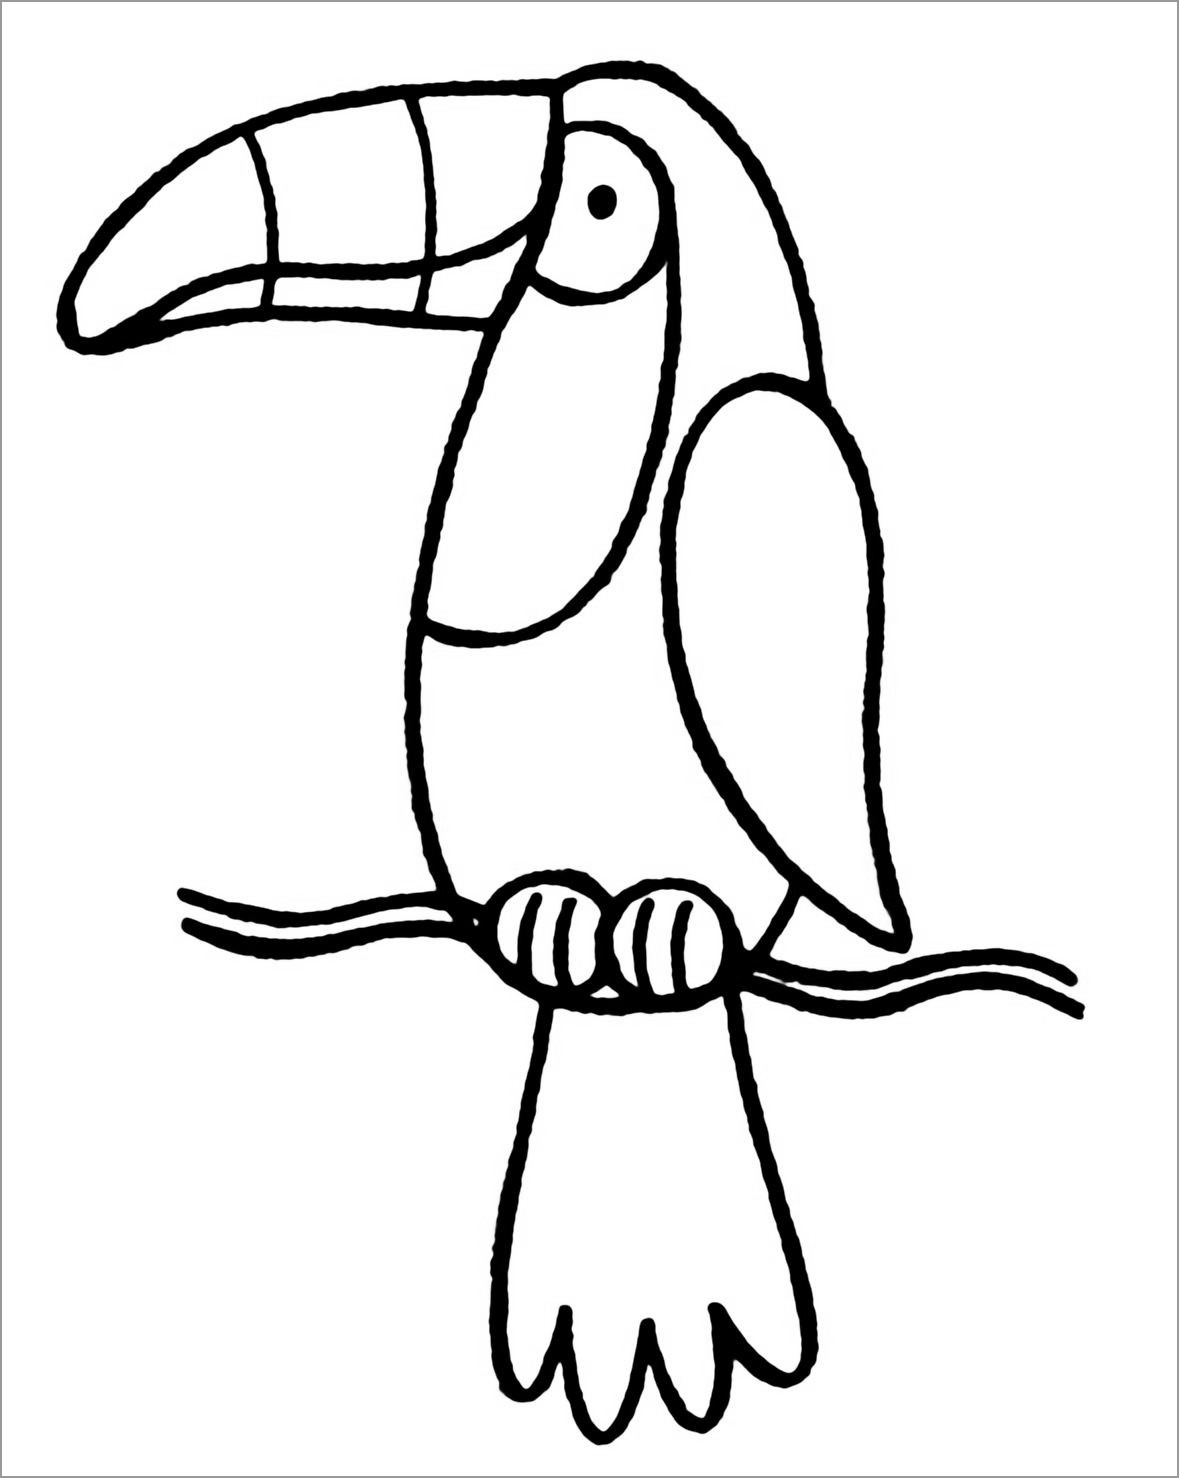 Toucan Coloring Page for Preschool